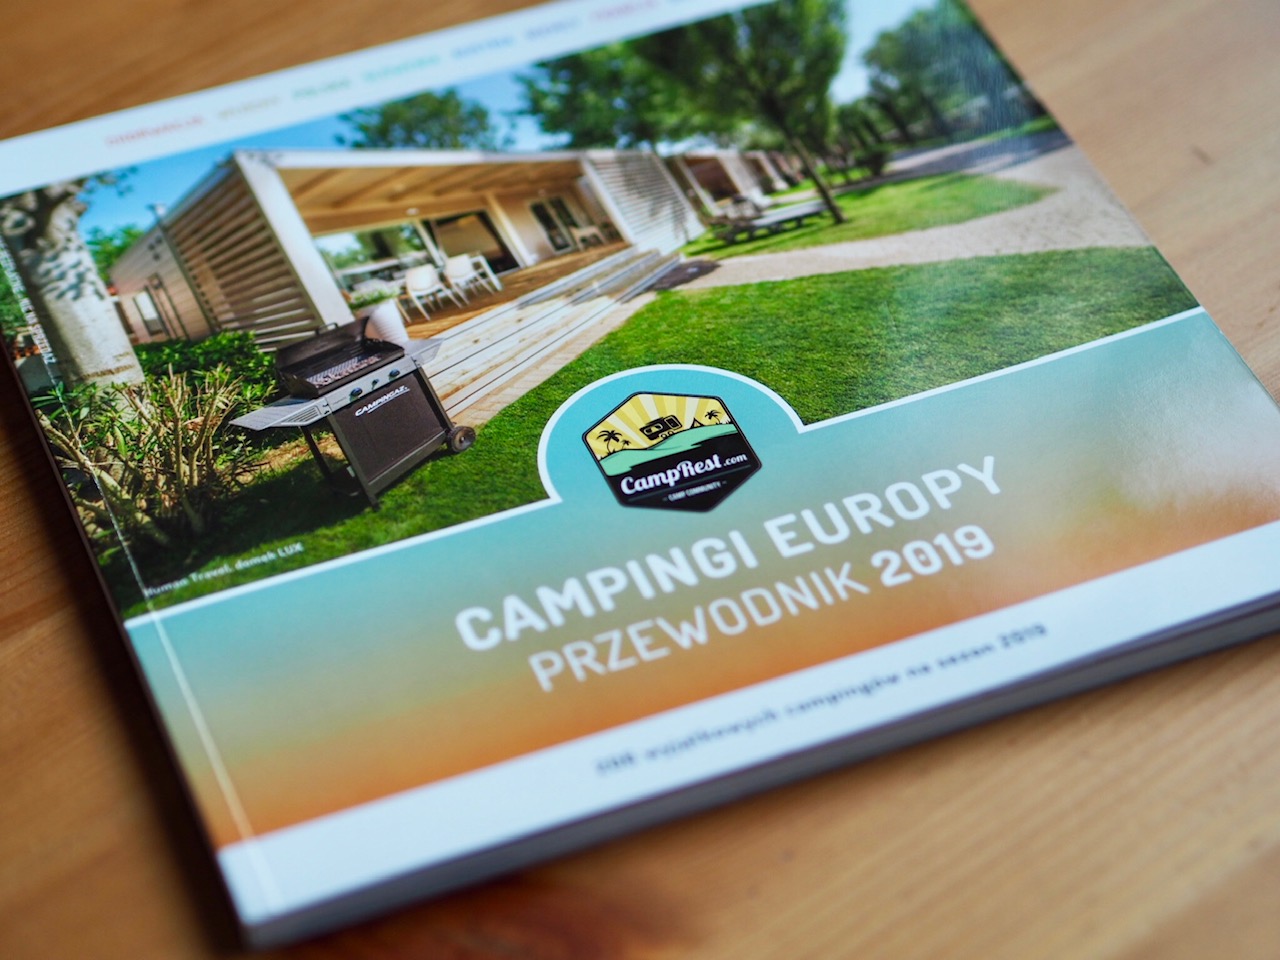 The &quot;Campings of Europe 2019&quot; guide - how to get it? – main image